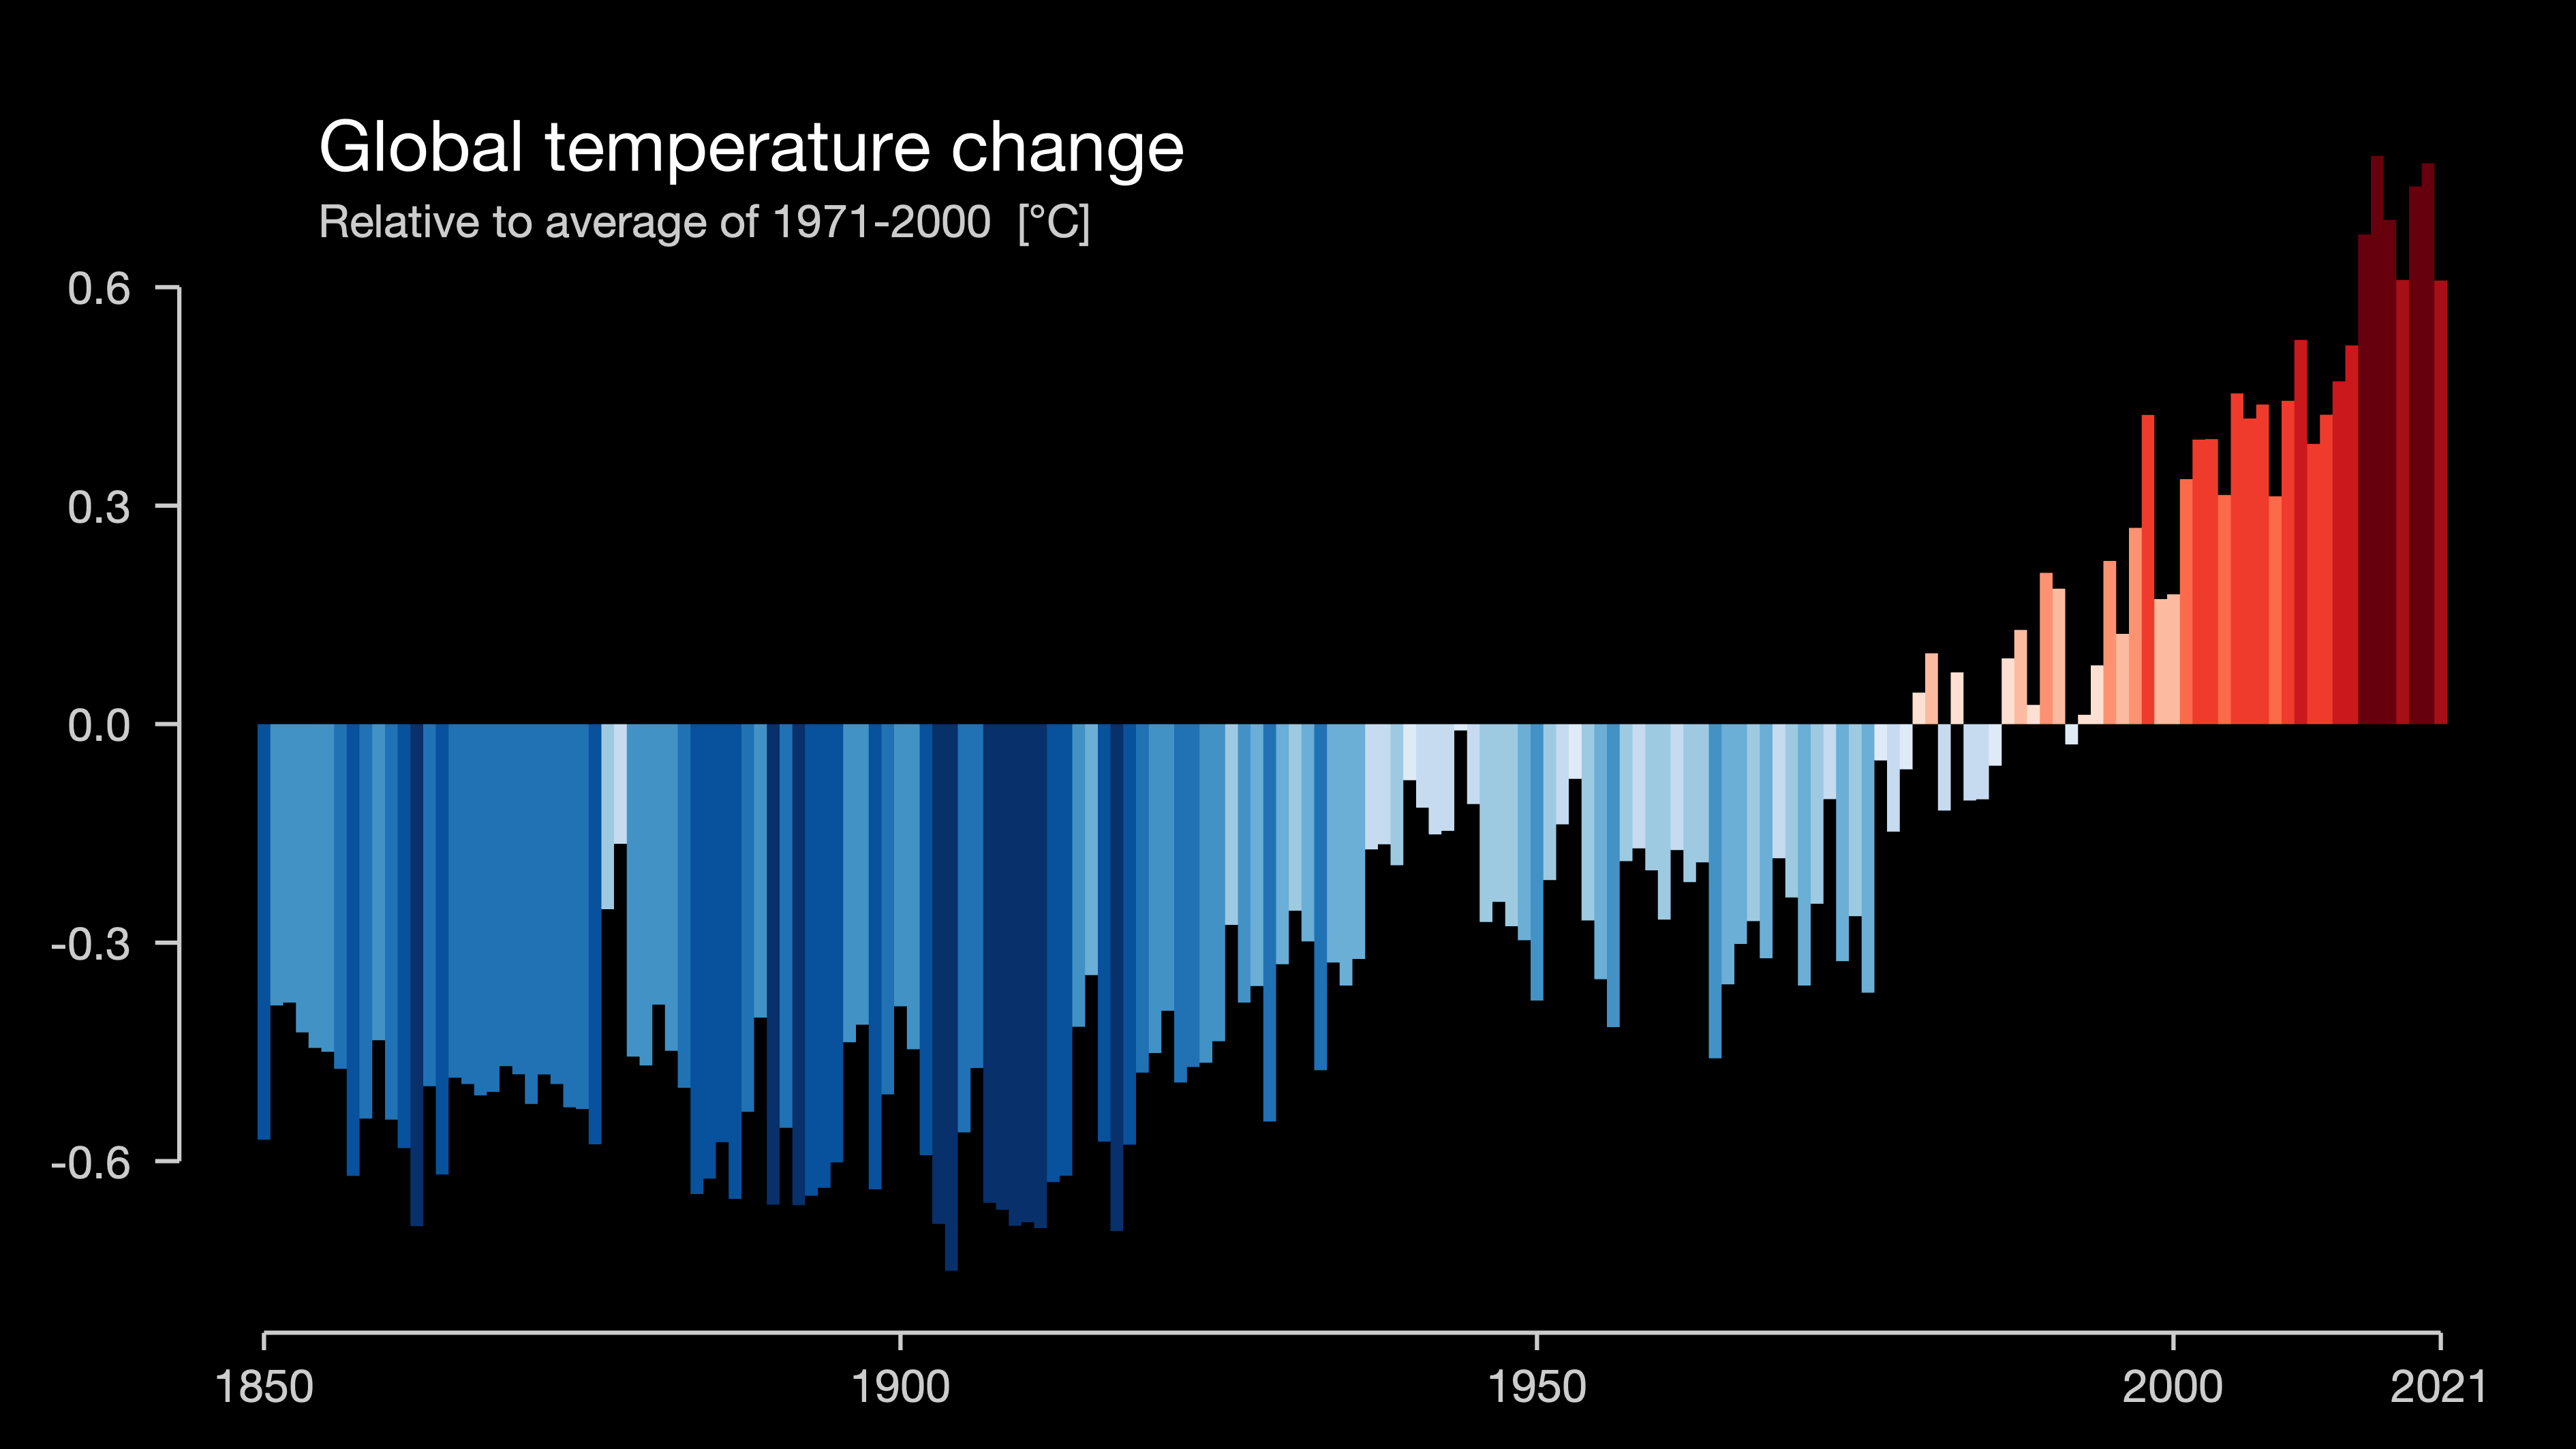 This graphic created by Professor Ed Hawkins shows the changes in global temperature since 1850.